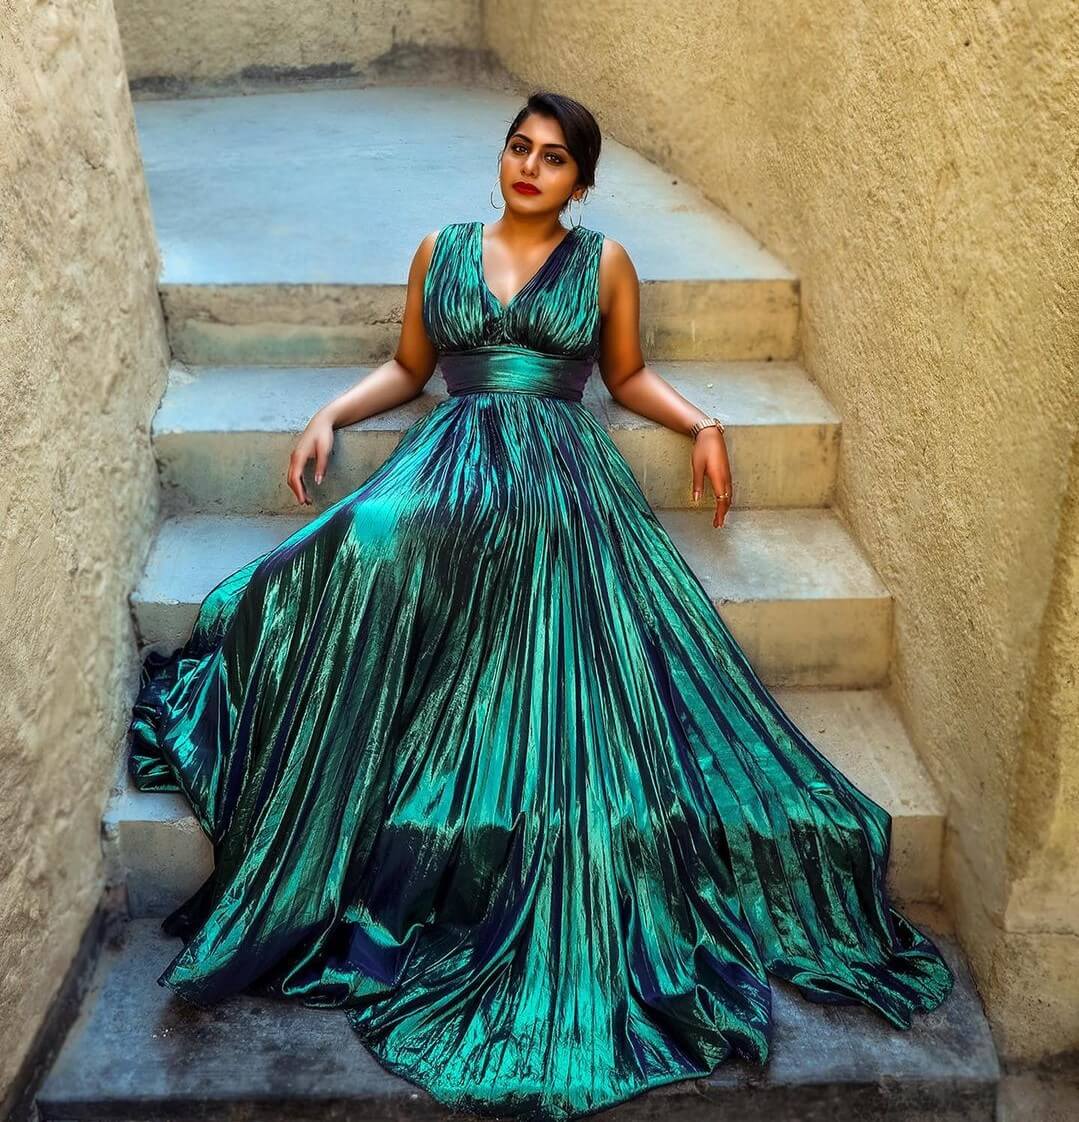 Gorgeous Meera Nandan In Metallic Green Long Gown Perfect Evening Party Looks